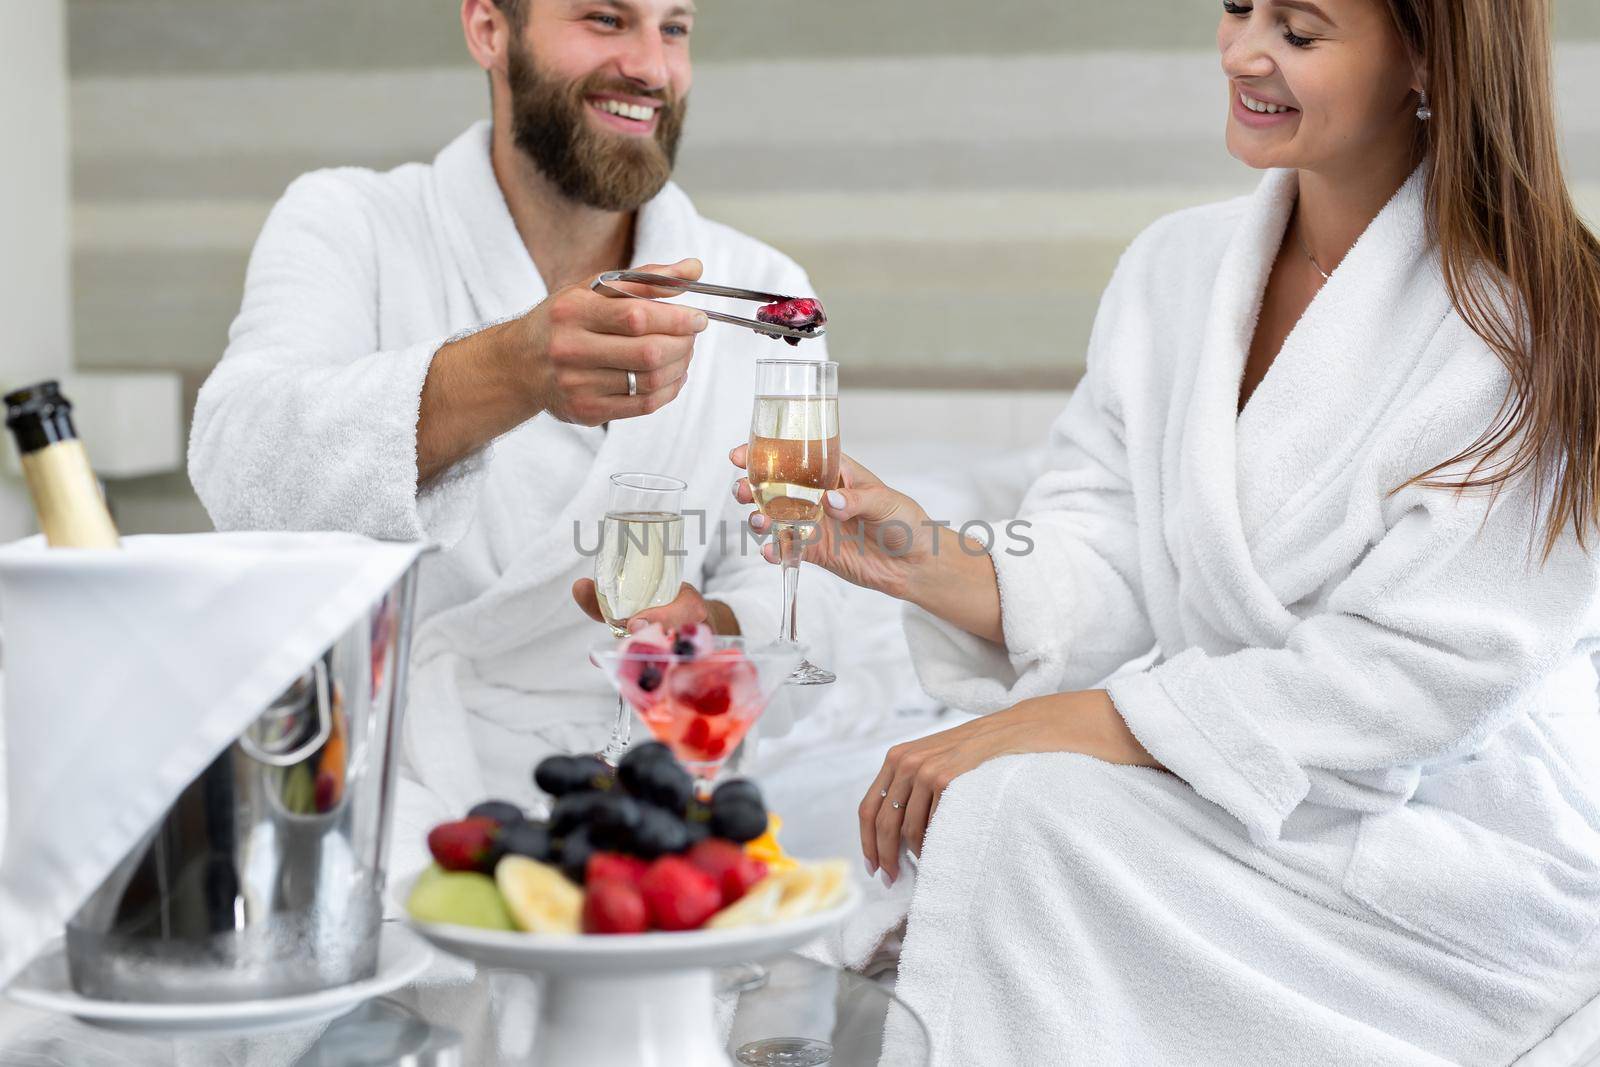 Man puts berries in a glass of sparkling wine to his woman in a hotel in bed by StudioPeace